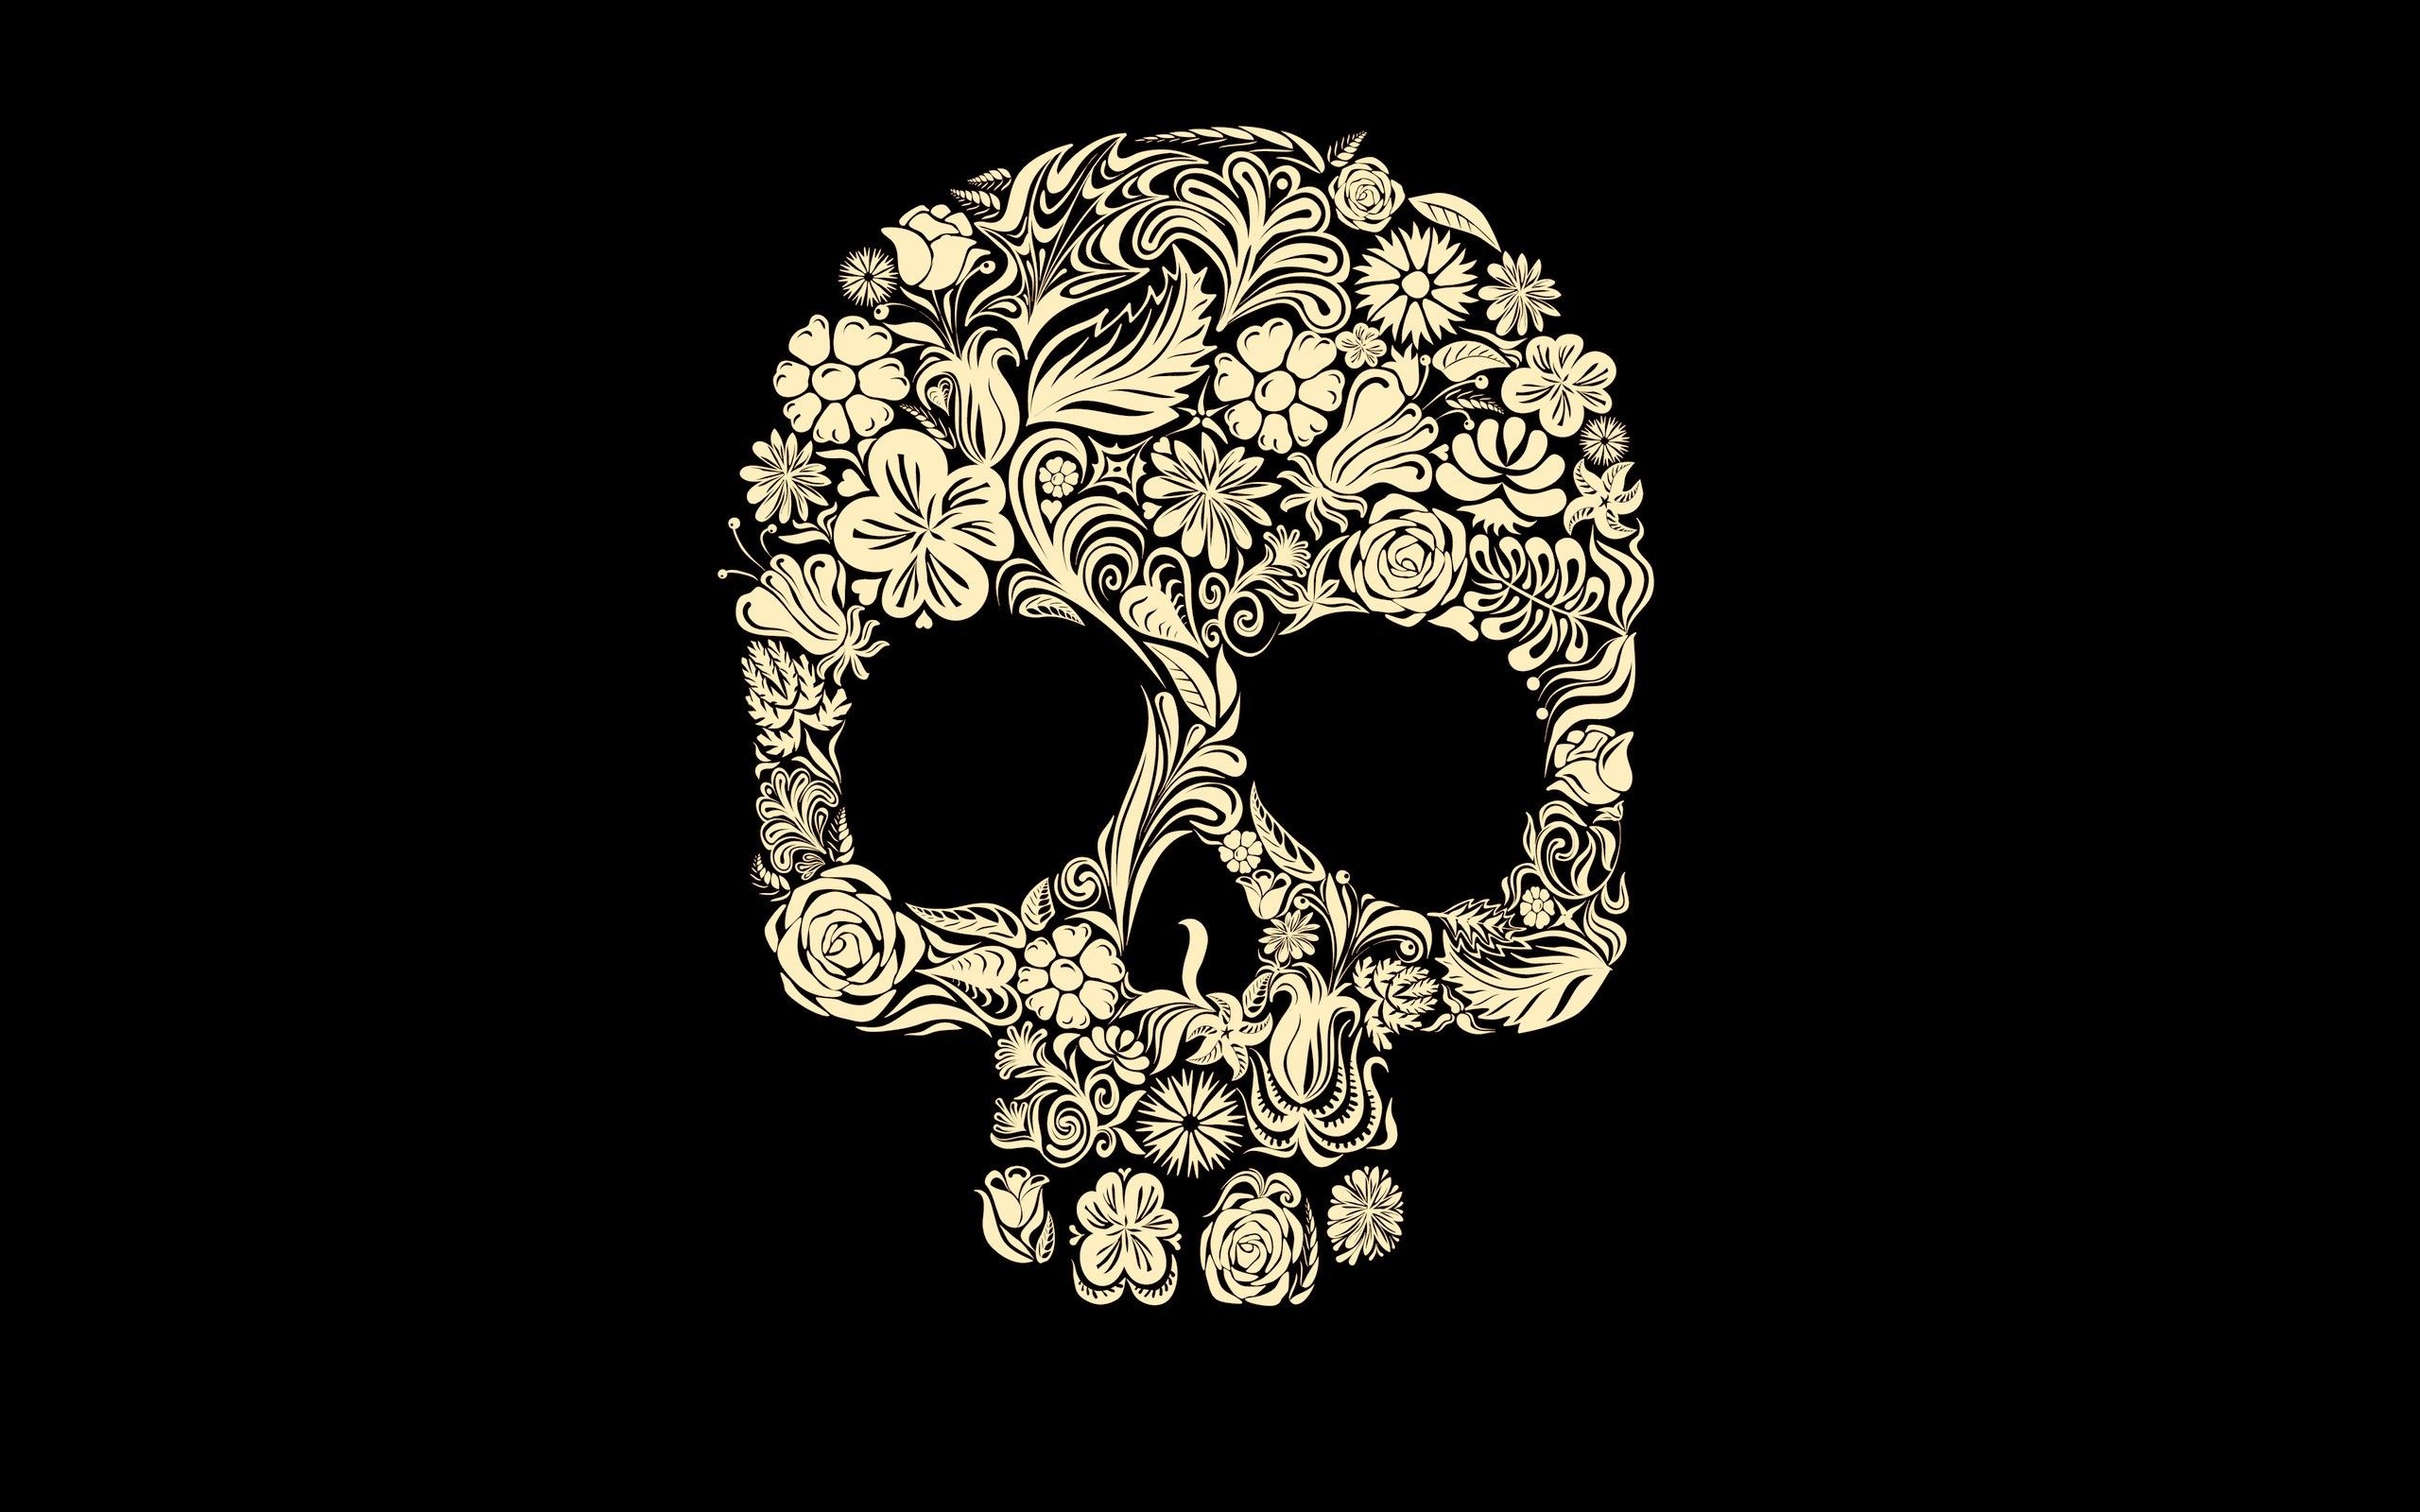 Skull with flowers on a black background - Skull